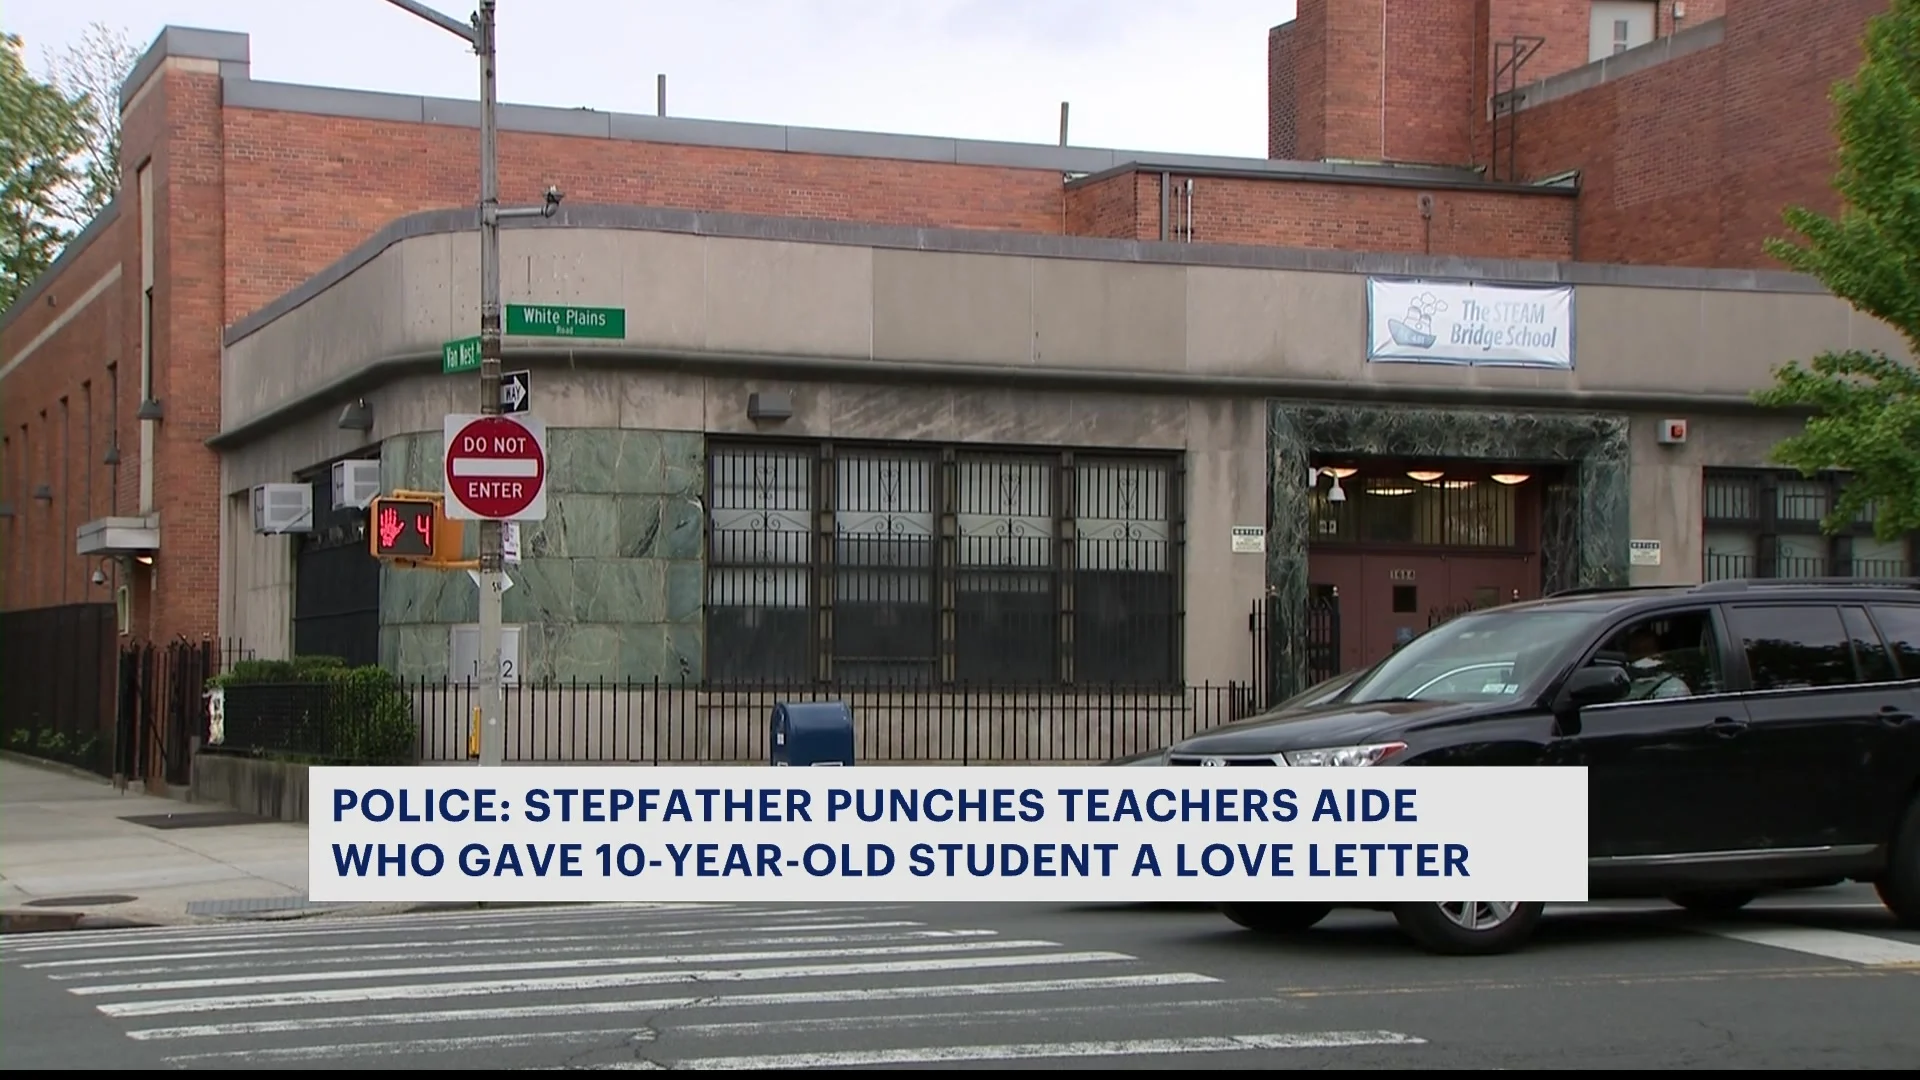 NYPD: Stepfather punches teacher’s aide who gave student a love letter; teacher's aide charged